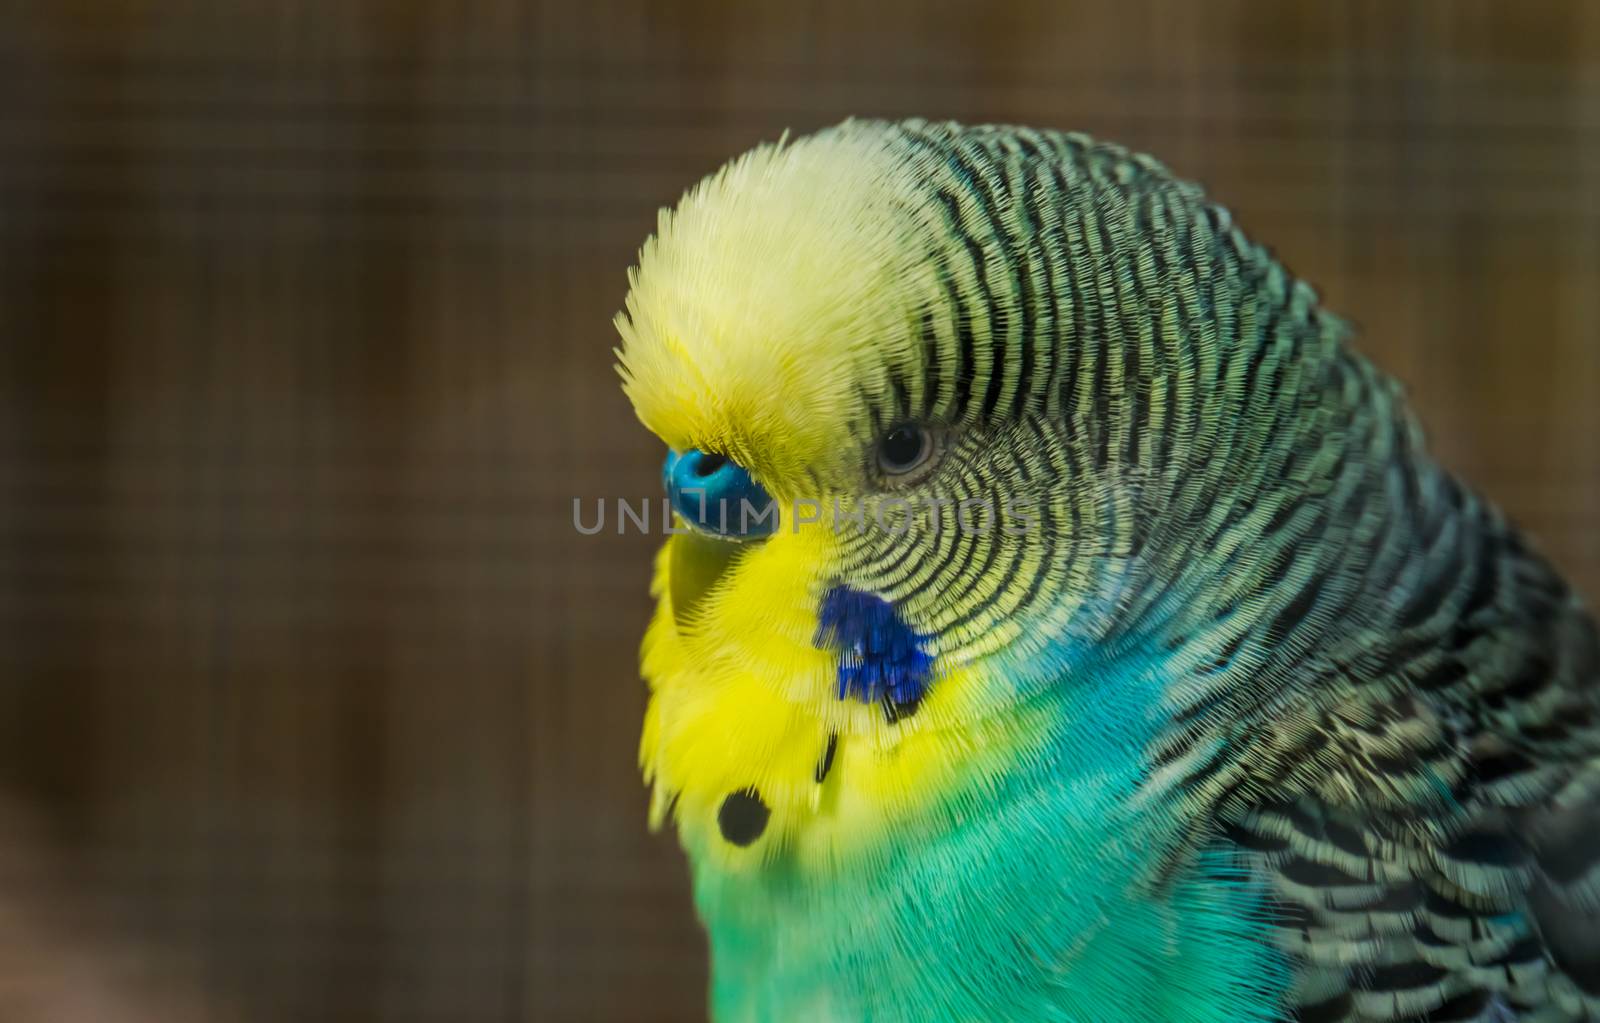 green and yellow budgie parakeet with its face in closeup, tropical bird specie from Australia by charlottebleijenberg